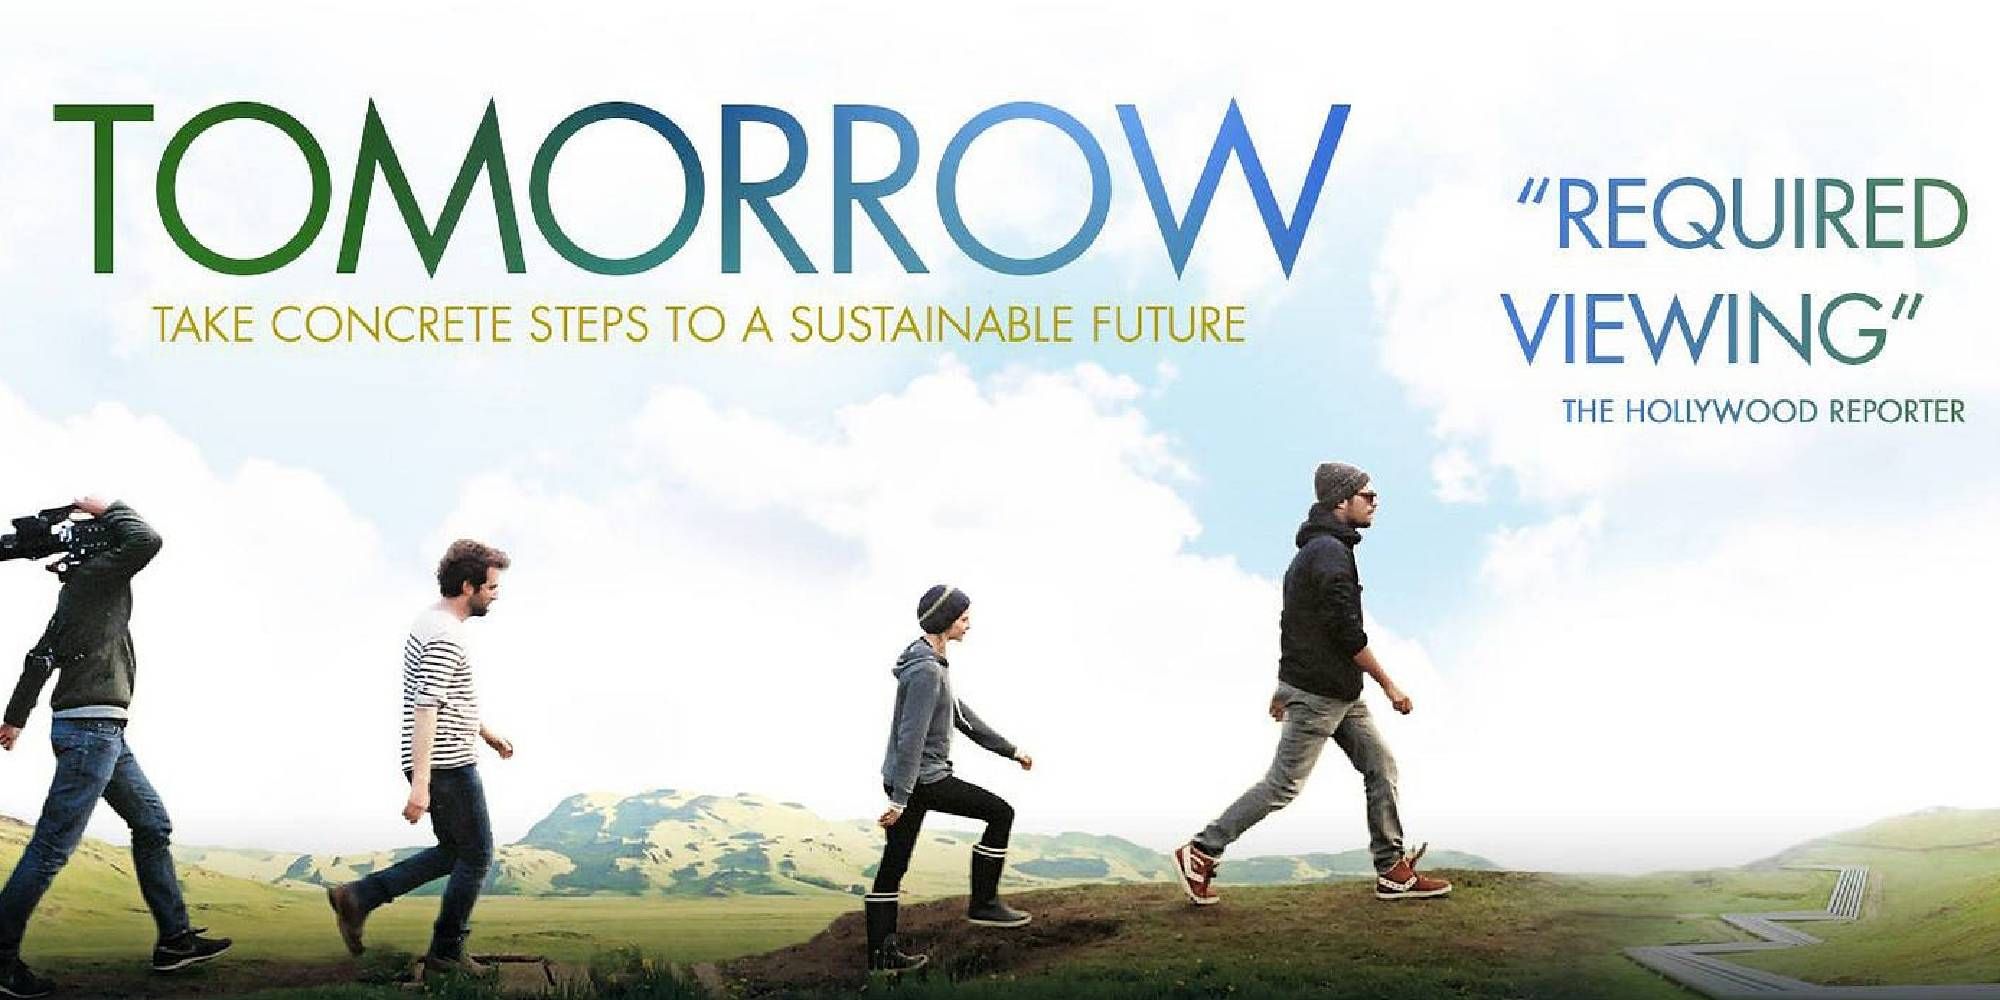 Tomorrow movie poster with four people walking forward.